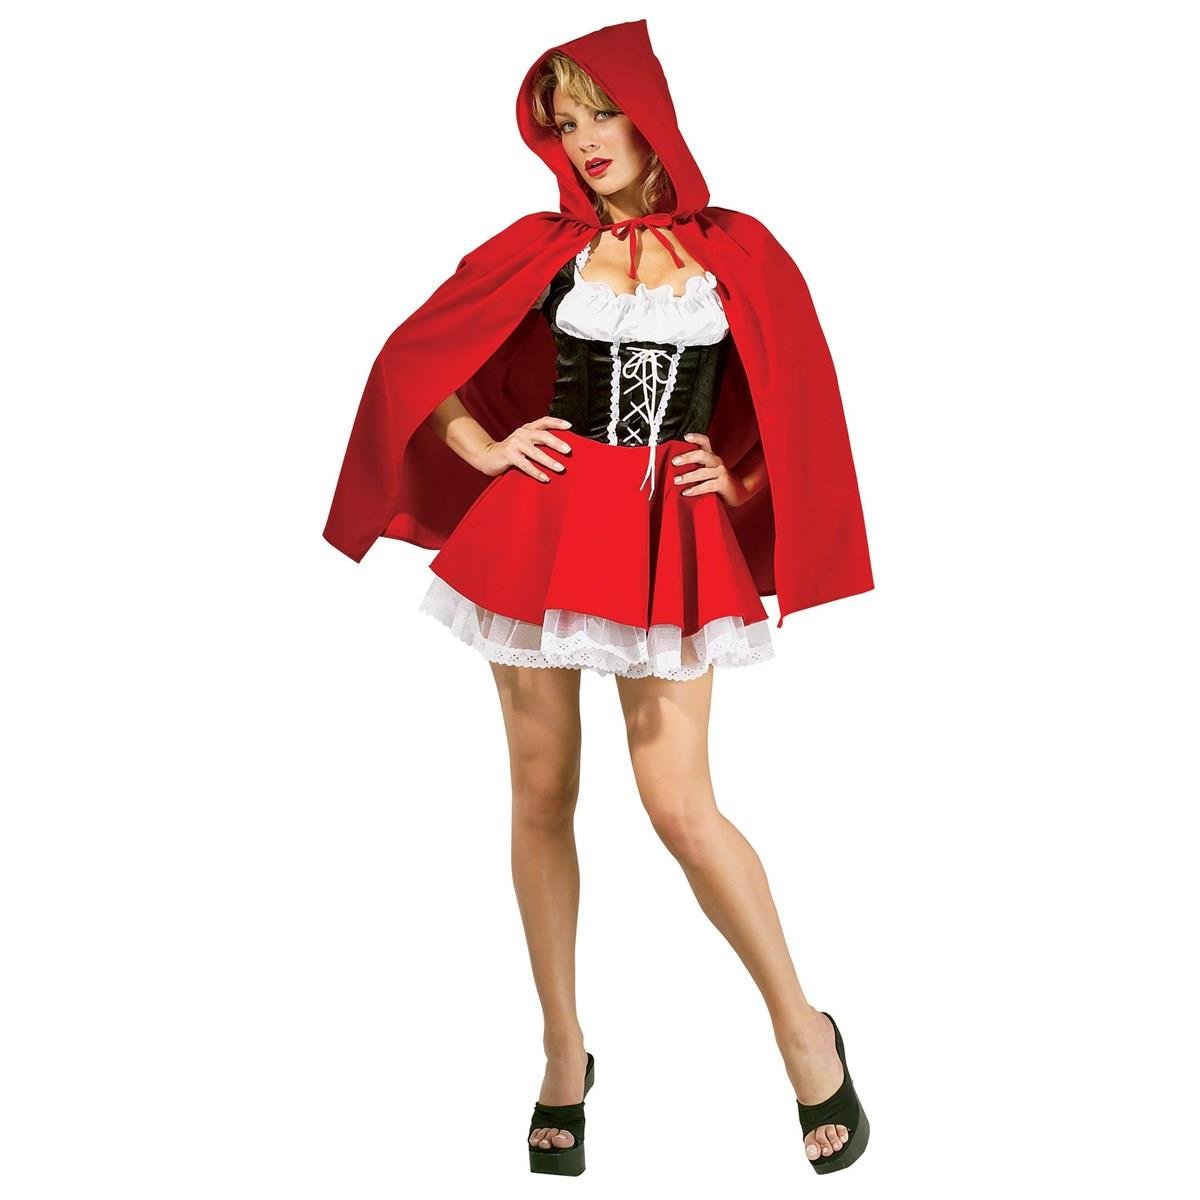 279943 Halloween Womens Red Riding Hood Costume - Large